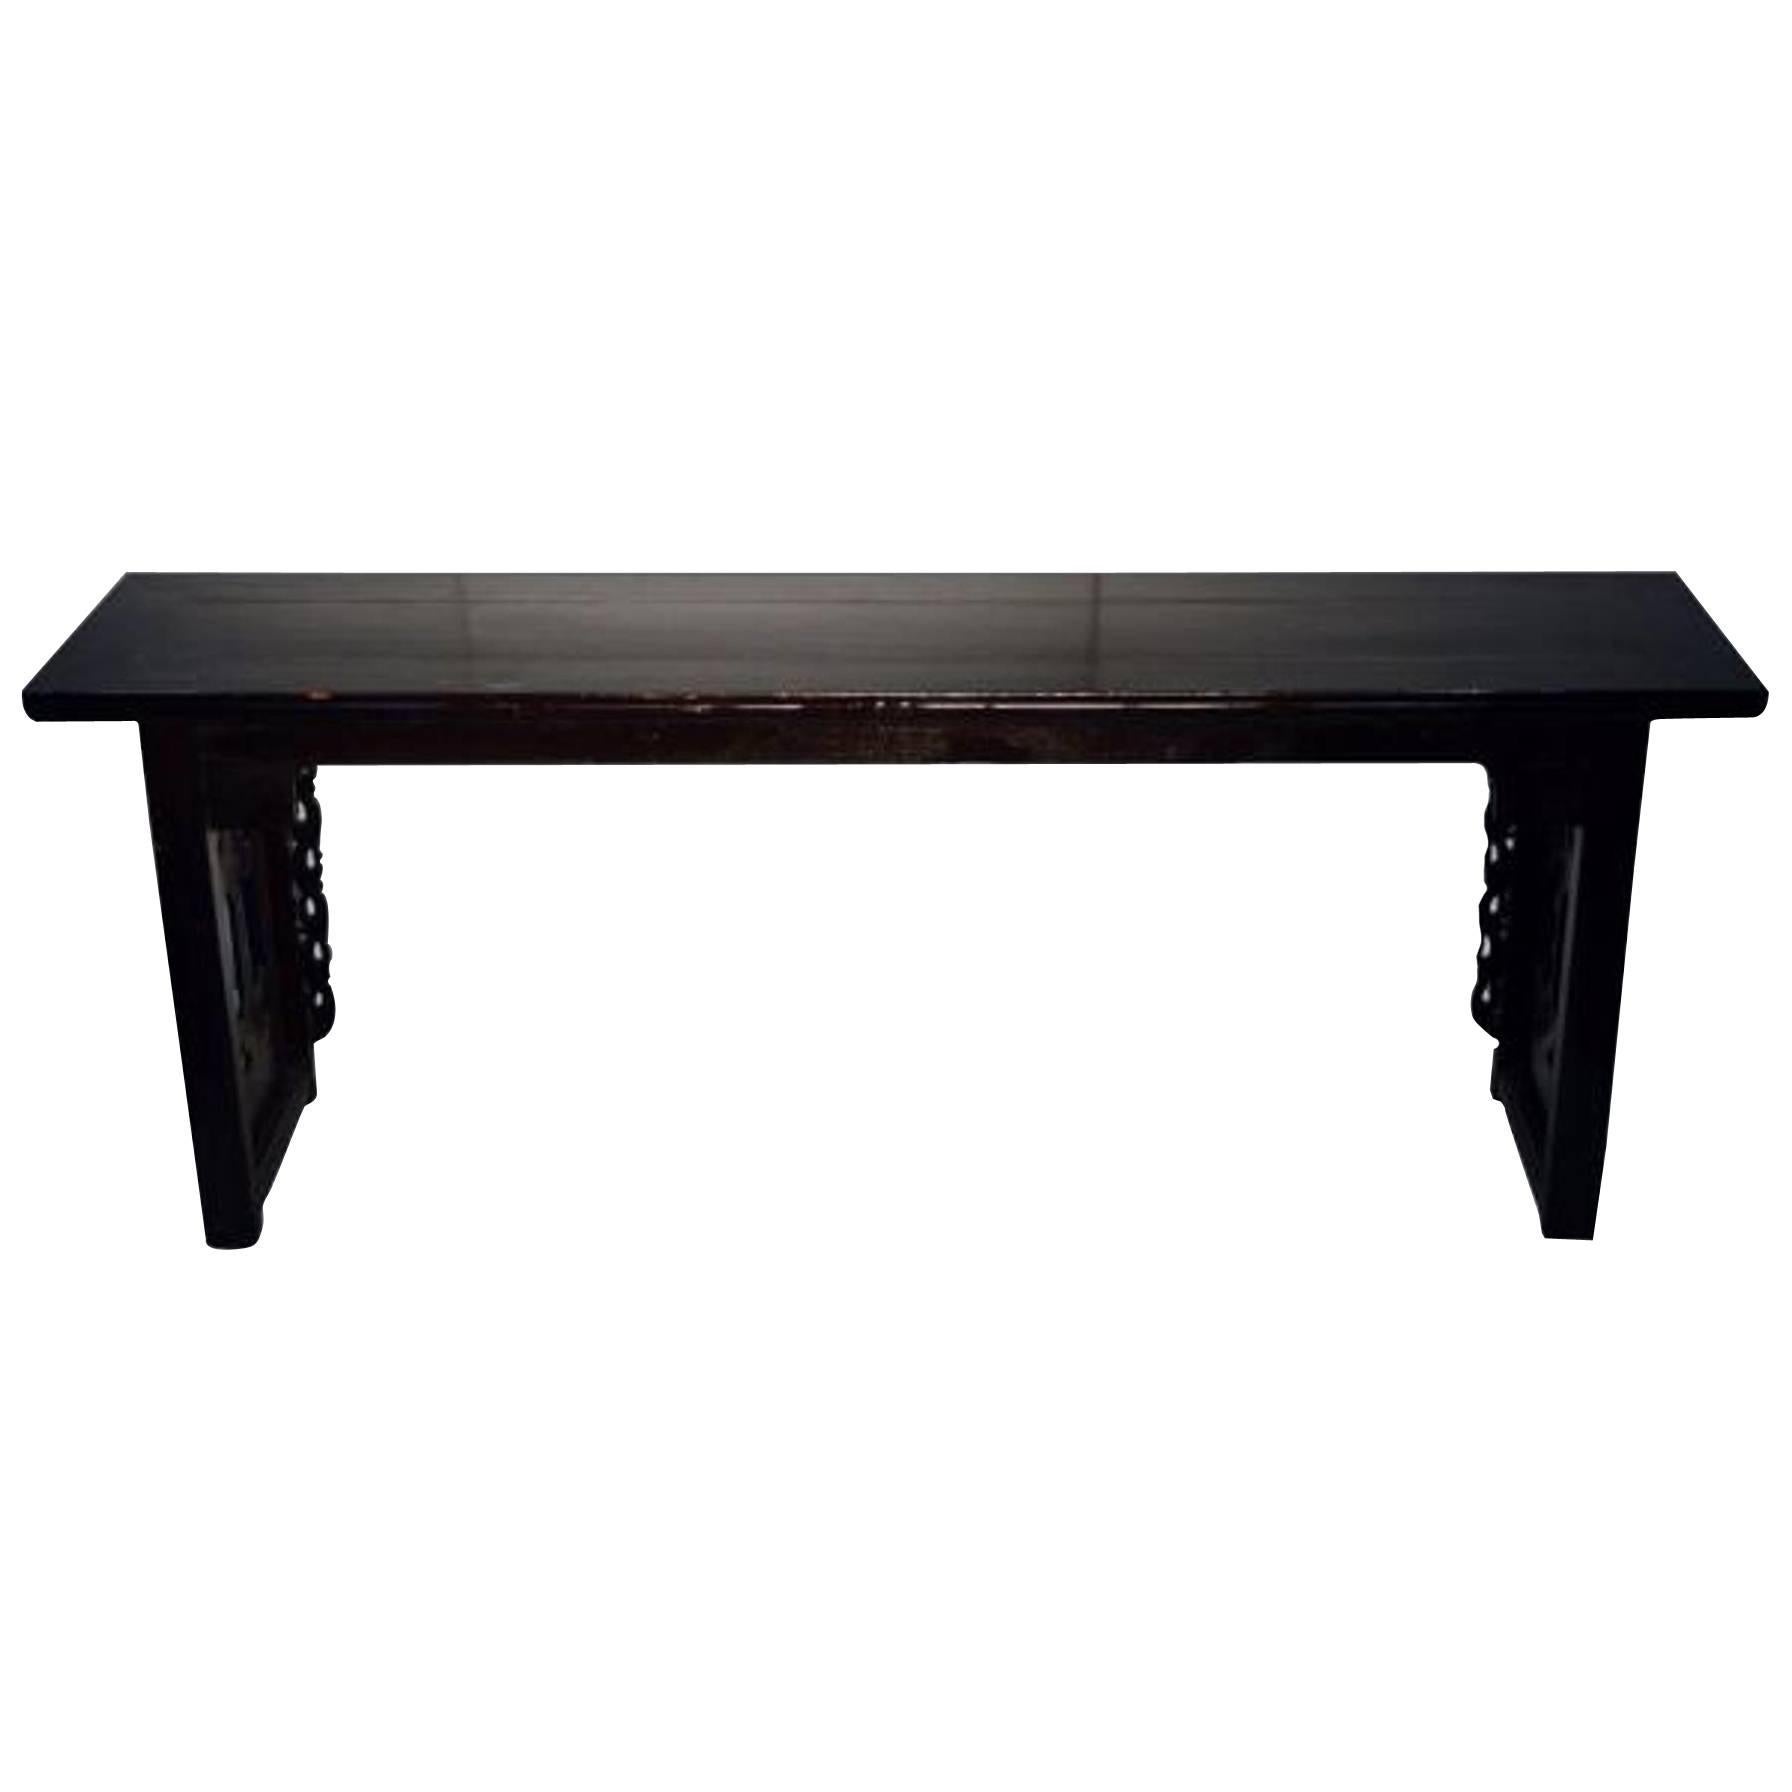 Antique Dark Lacquer Console Table with Molding from China in the 1800s